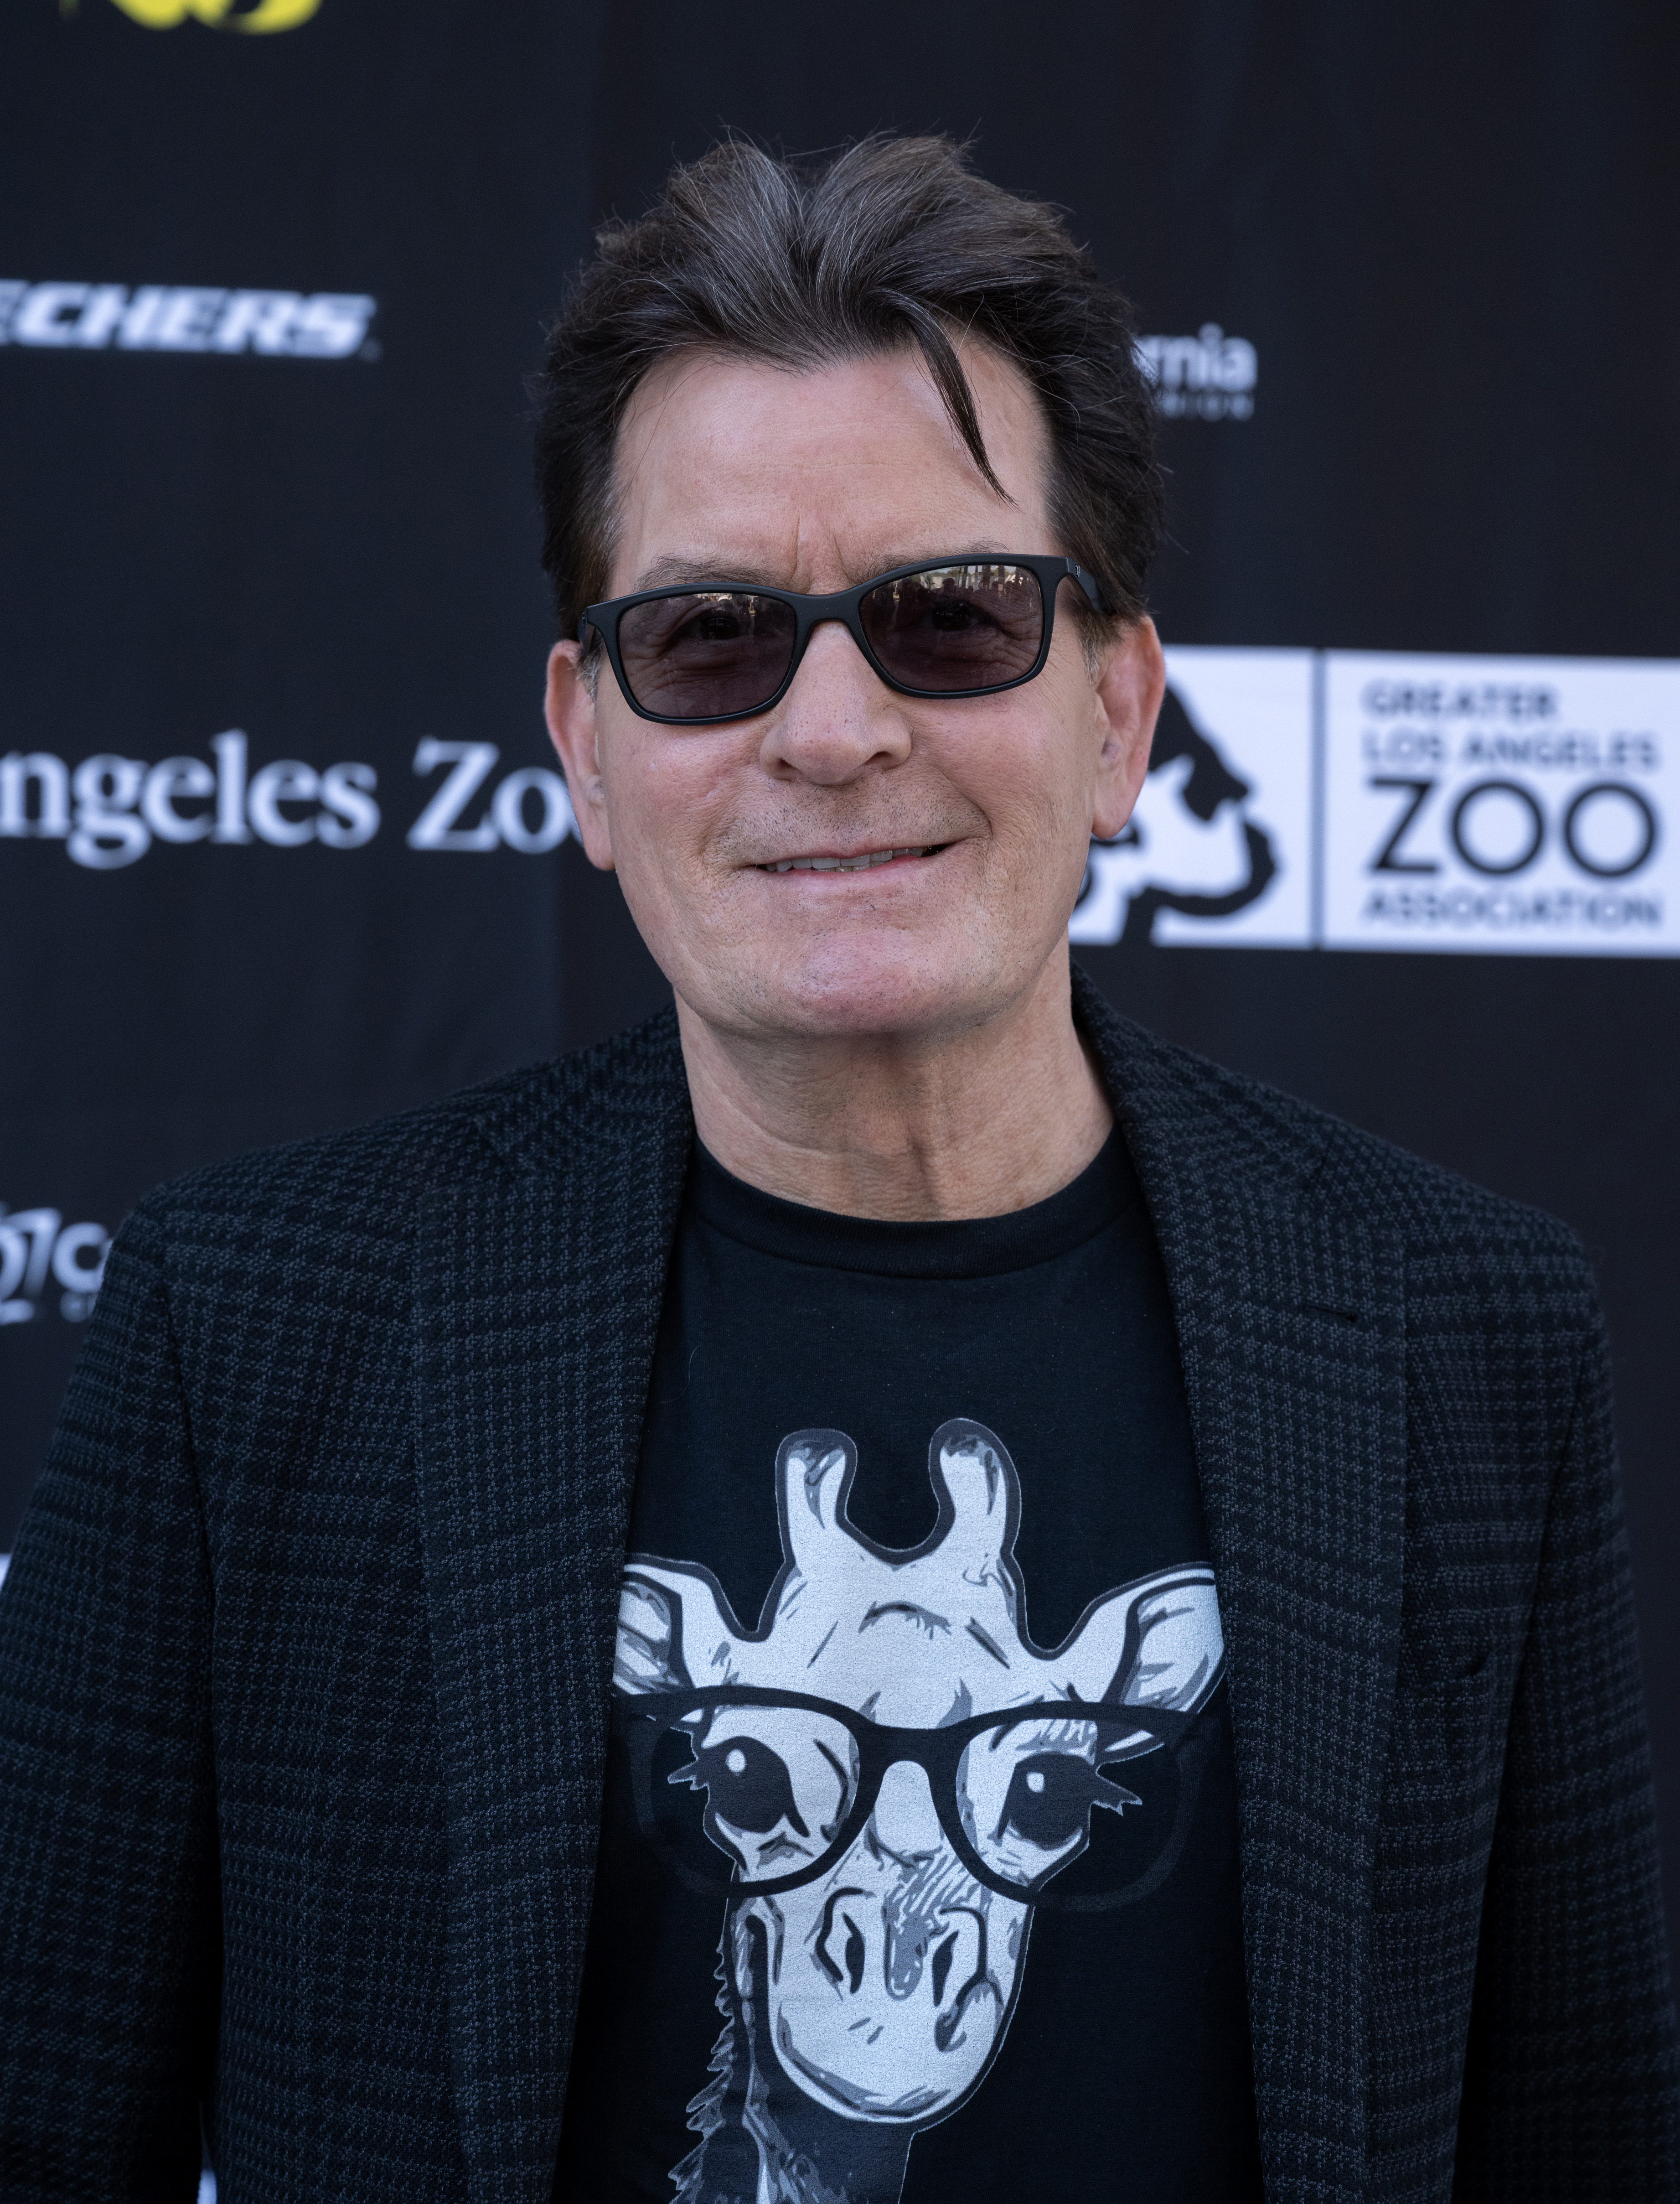 Charlie Sheen at the Greater Los Angeles Zoo Association's Beastly Ball 2023 | Source: Getty Images